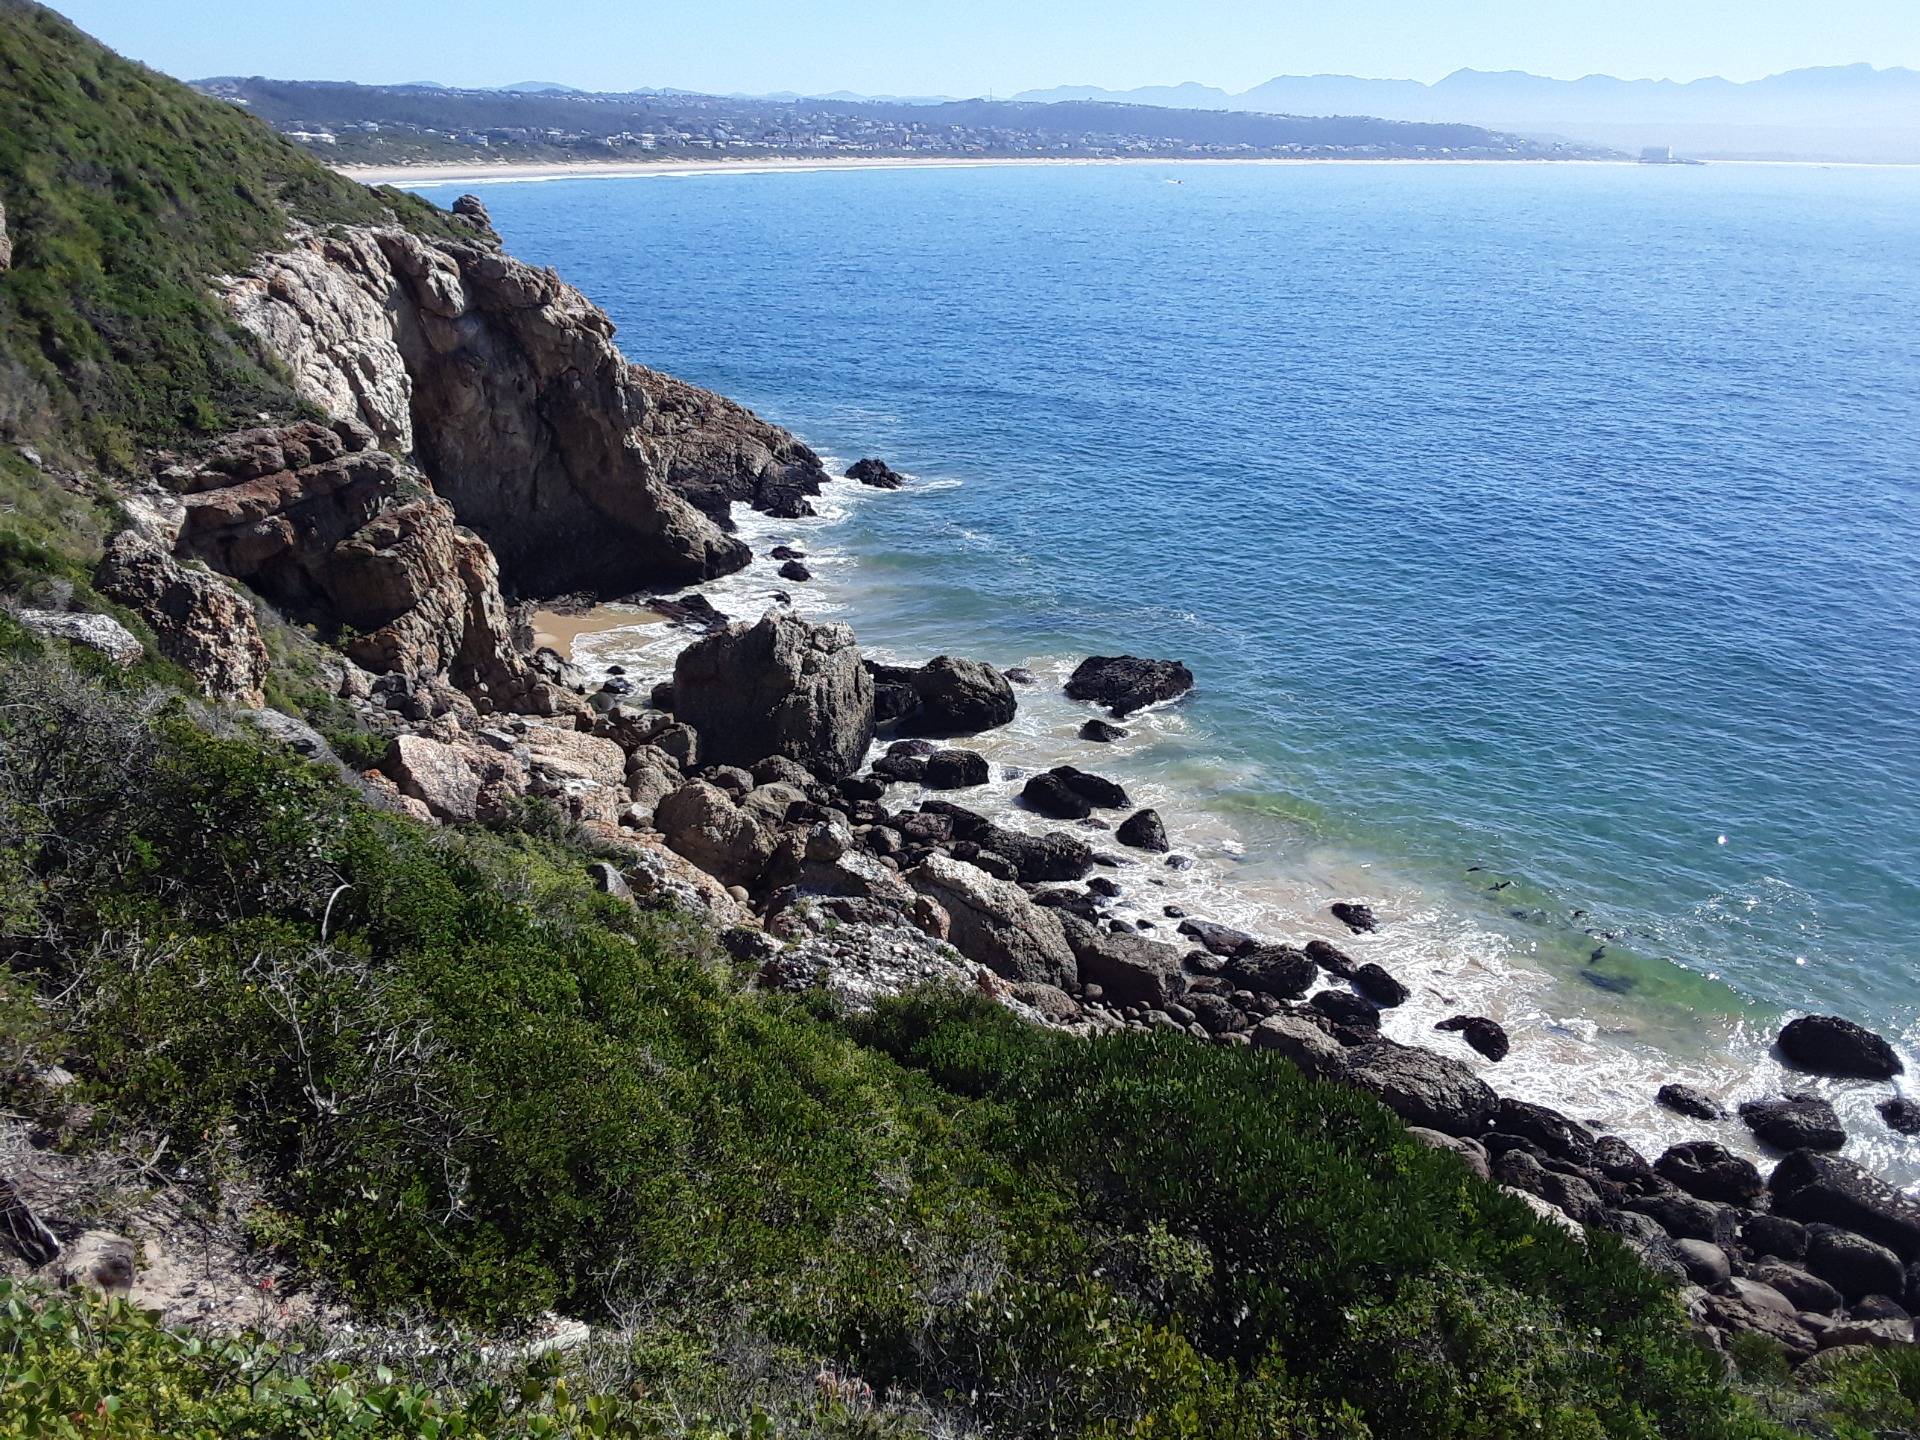 You can glimpse part of the seal colony below in the water, with RObberg beach in Plettenberg Bay in the distance